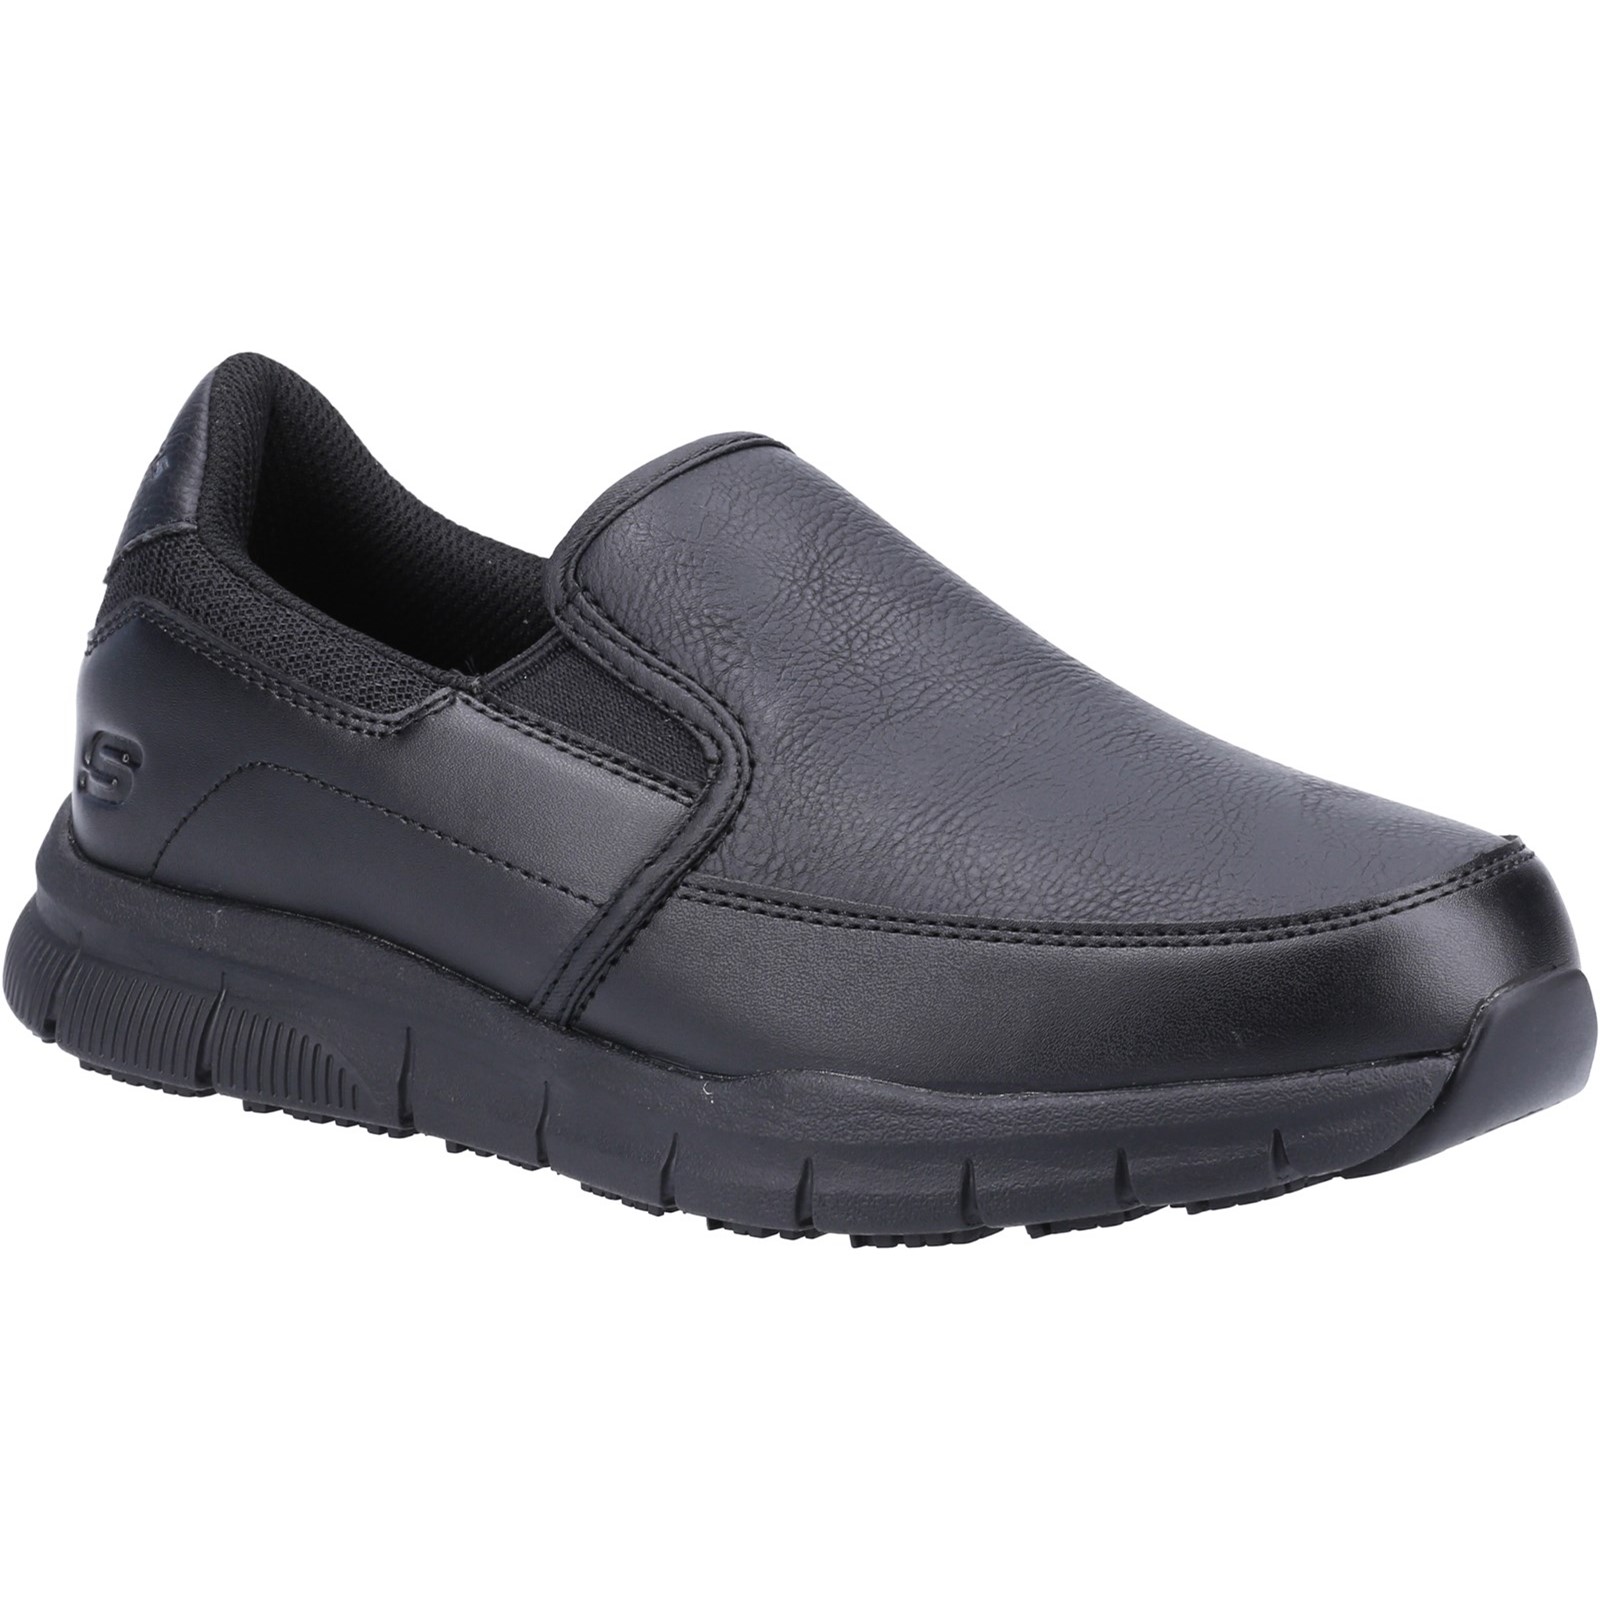 Nampa Annod Occupational Shoes